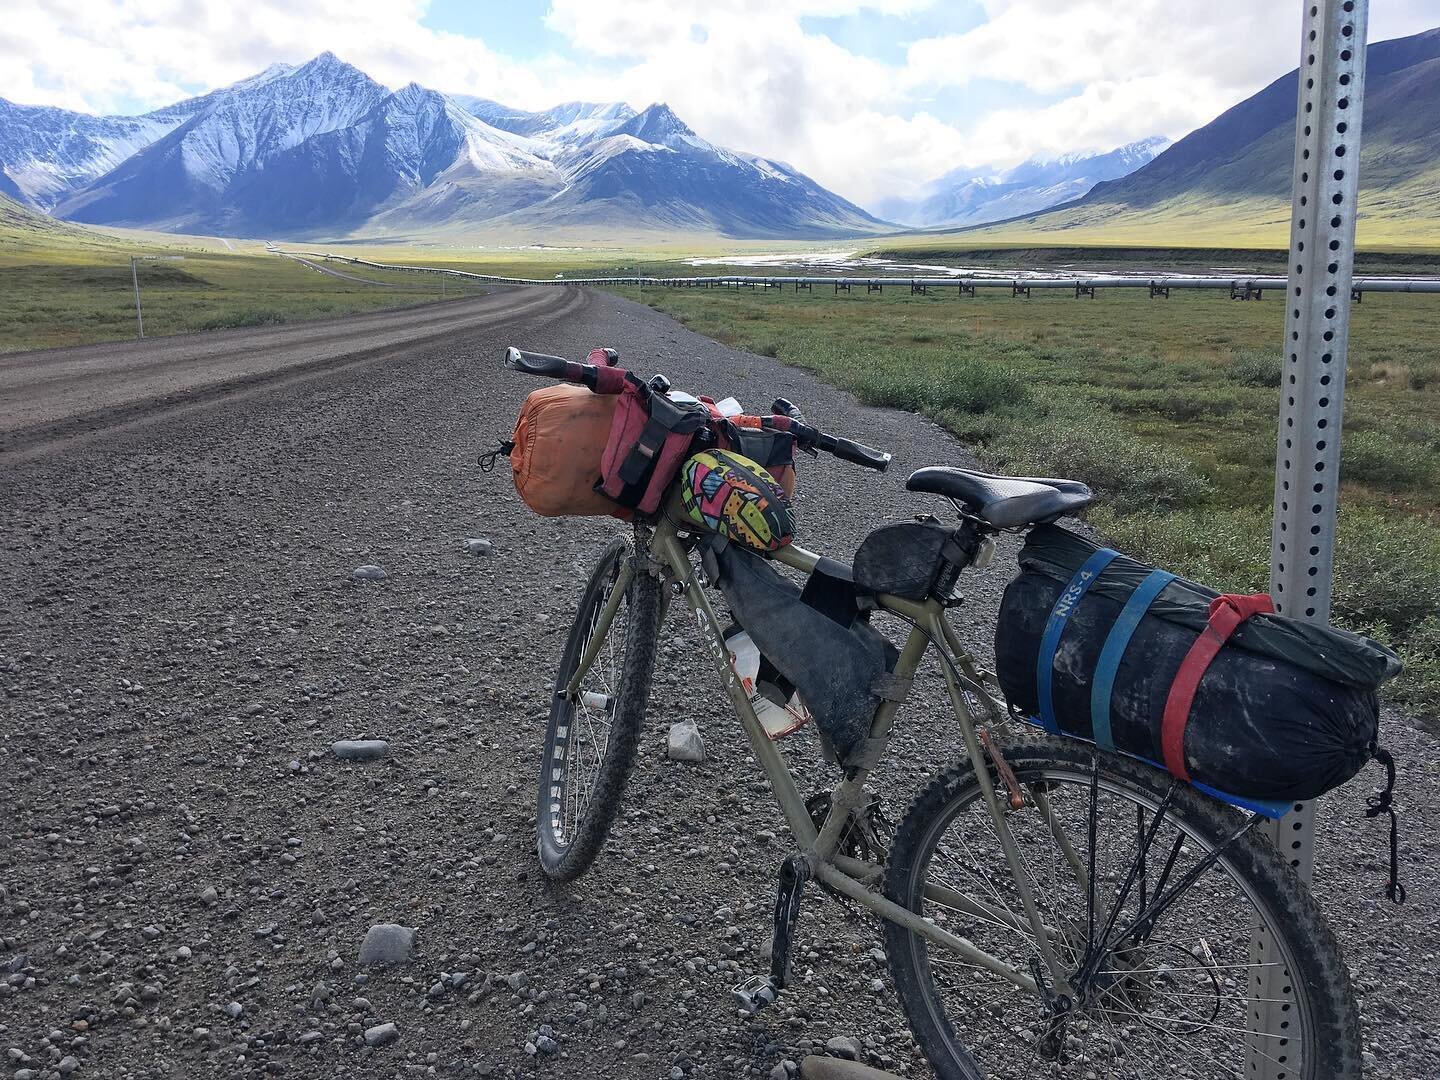 Can you spot our fun cockpit bag? Katie took her custom bag on an AK Haul Road adventure this past summer and now we wanna go too&hellip;

We love to see where you take your Sew Alpine gear!

#sewalpine #handmade #custommade #customsewn #bikebag #bik